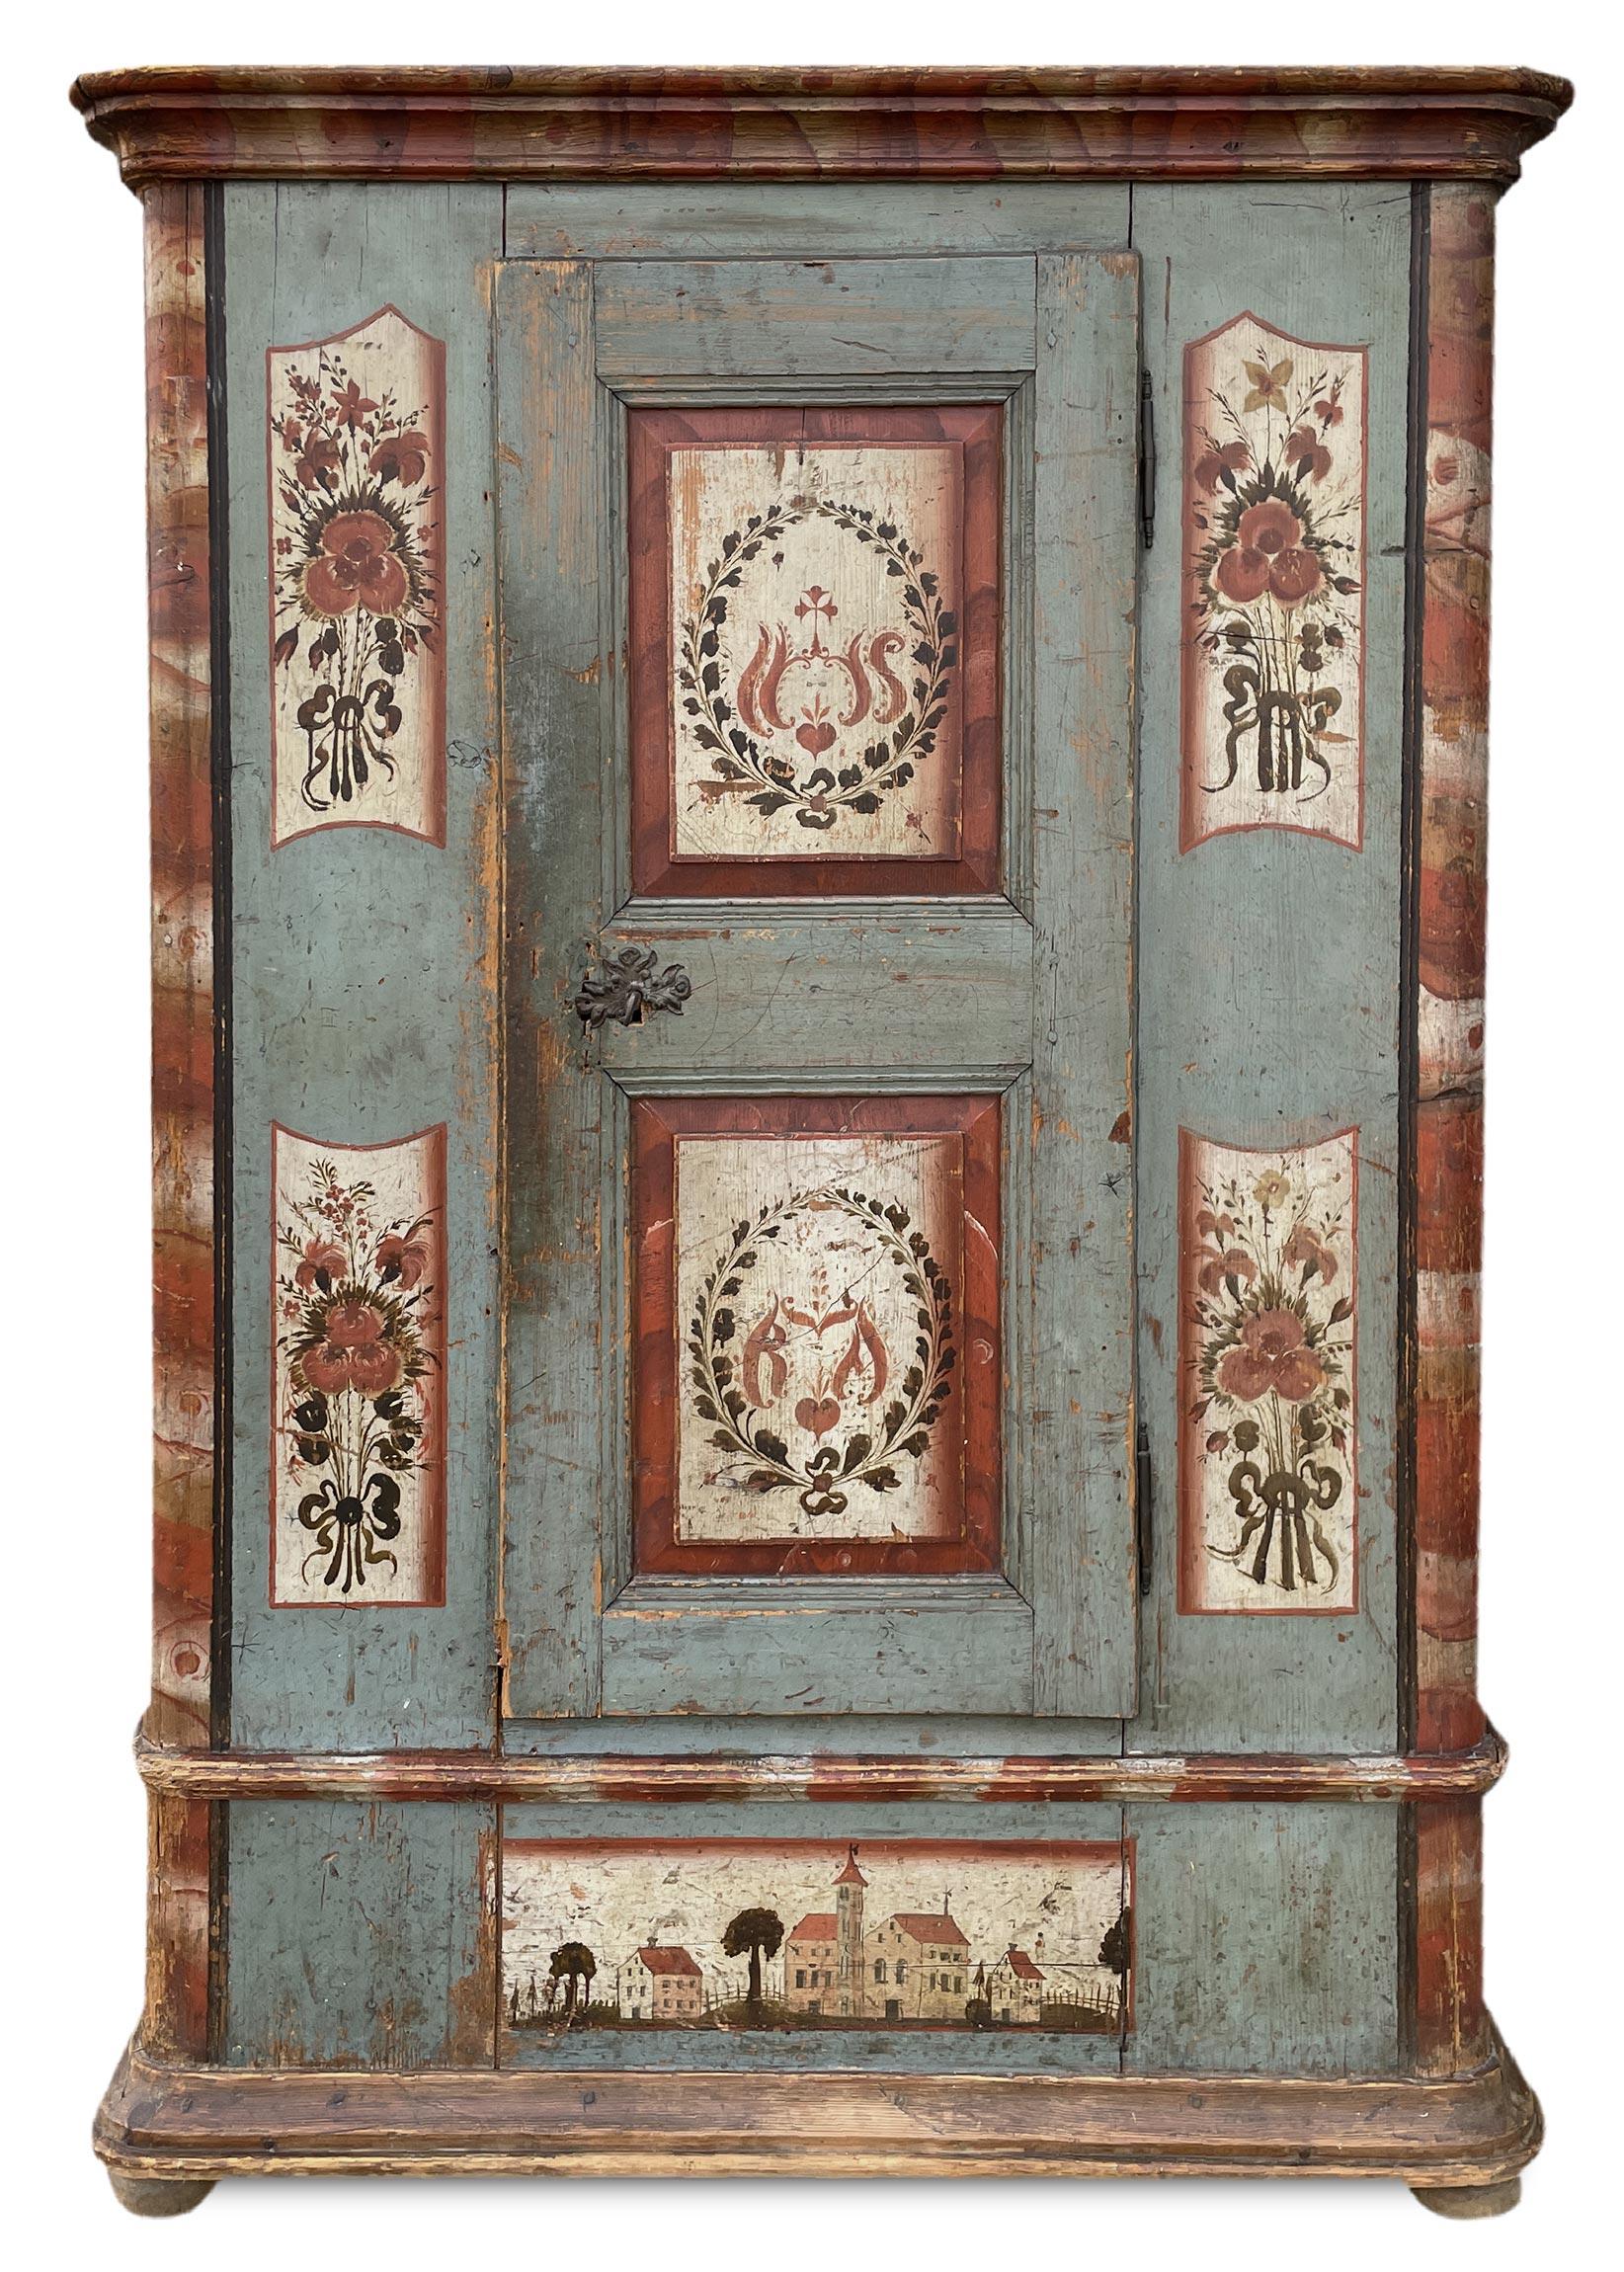 Blue Painted Cabinet Circa 1810 Circa

Measurements: H. 185 cm – L. 120 (129 at the frames) cm – D. 46 (51 at the frames) cm
Period: approximately 1810
Origin: Tyrol
Essence: Fir

Description
Beautiful antique wardrobe entirely painted in light blue